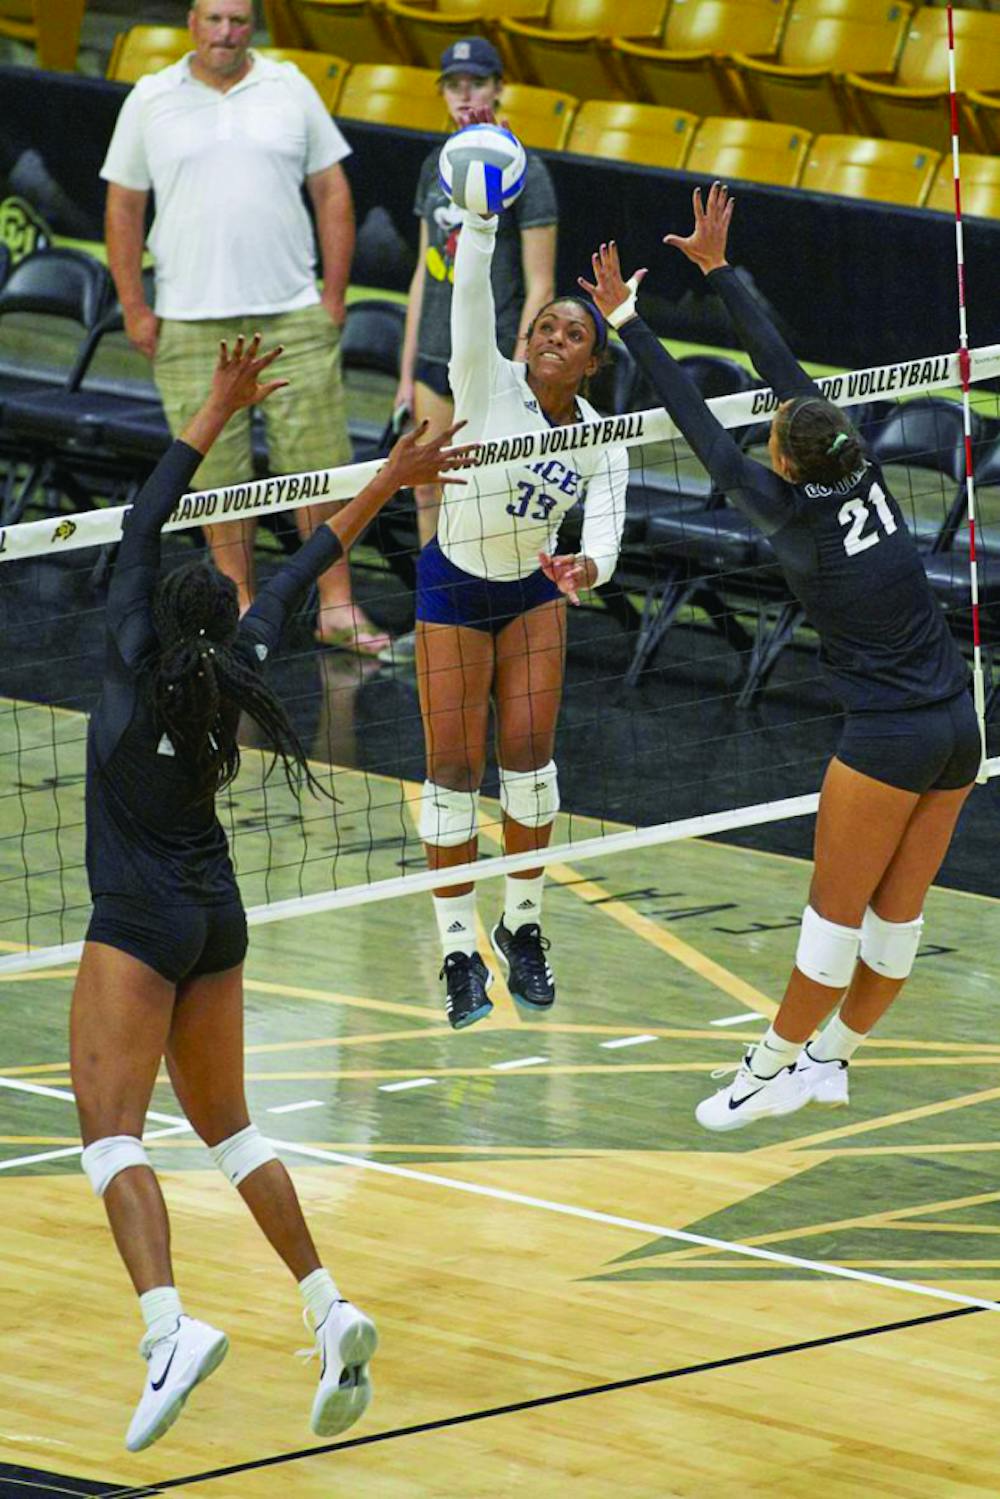 volleyball_color_coutesy_mark_waldron